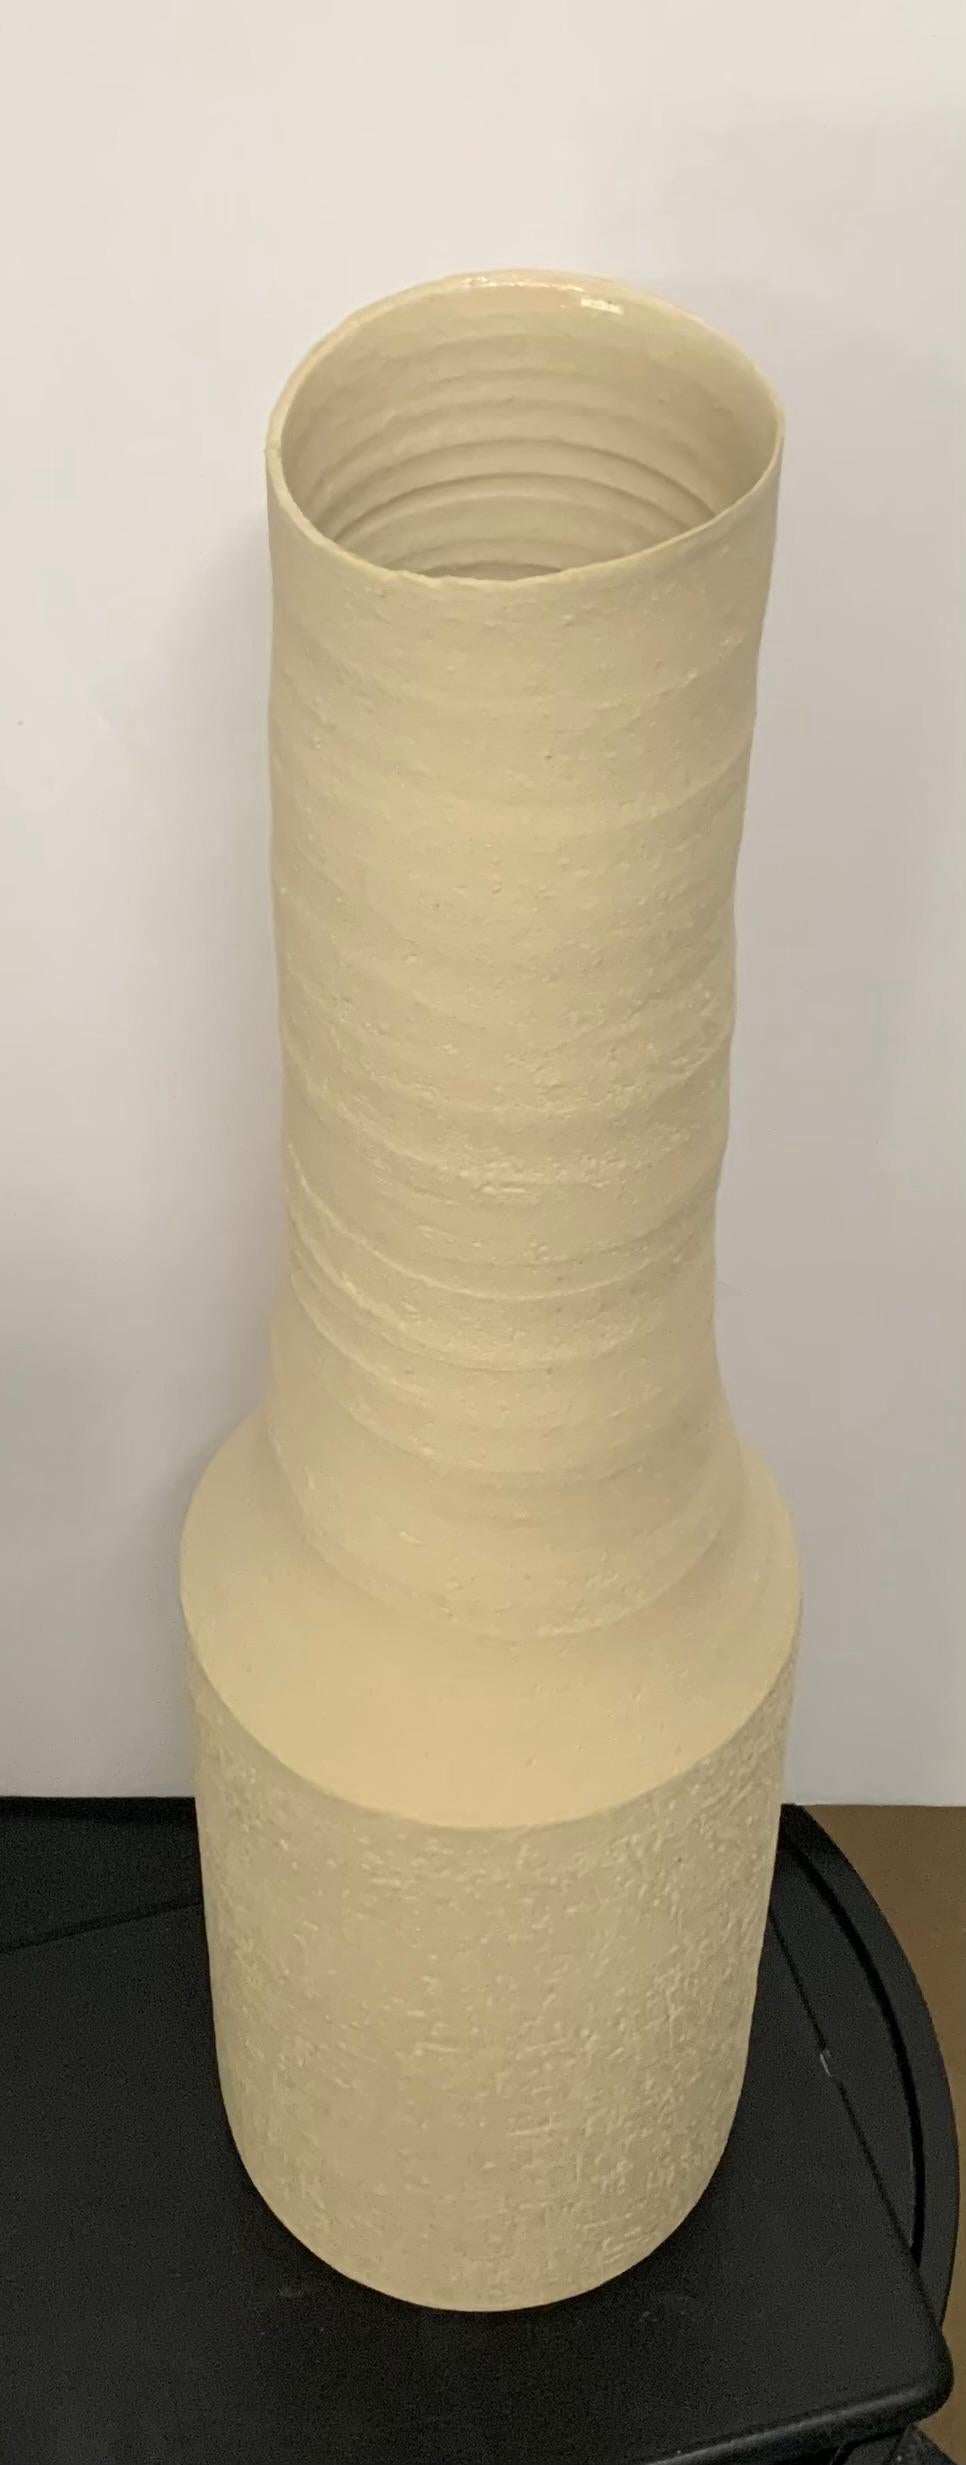 Contemporary German handmade stoneware vase.
Tall, thin funnel neck opening.
Sand color stoneware.
Part of a large collection of handmade vases of different sizes , shapes and textures